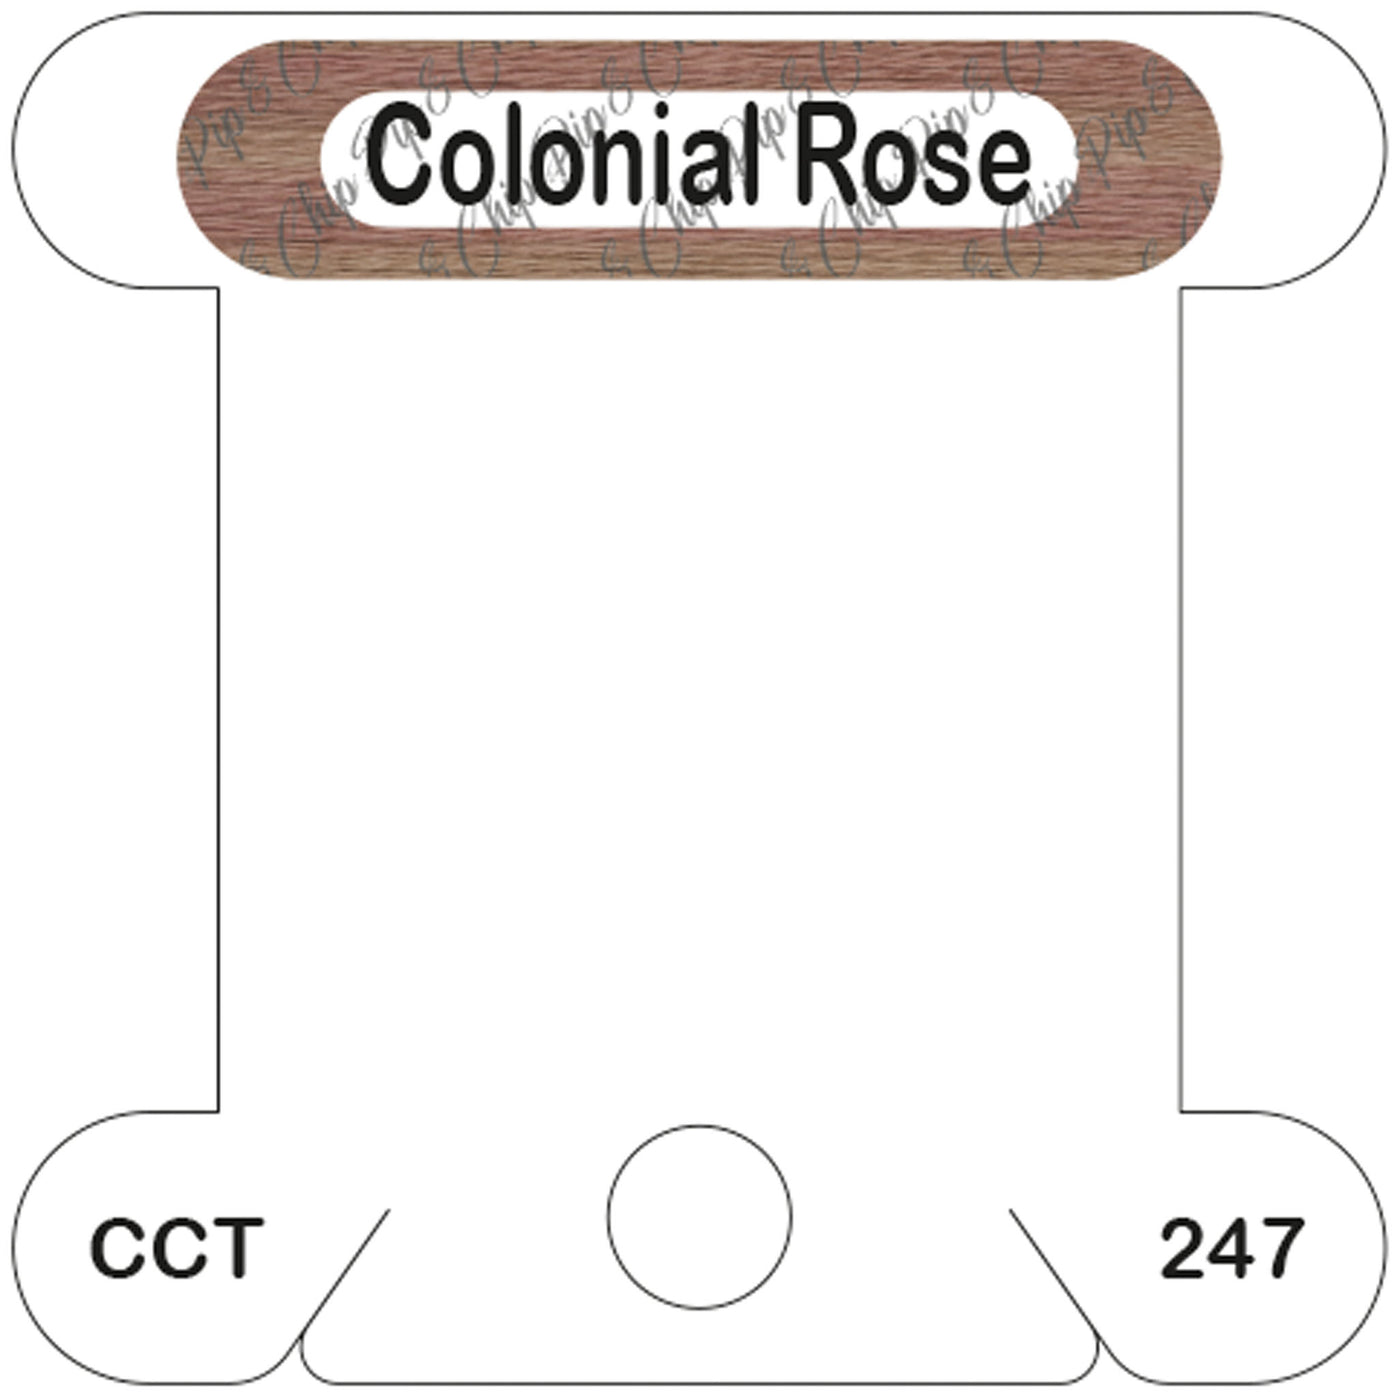 Classic Colorworks Colonial Rose acrylic bobbin